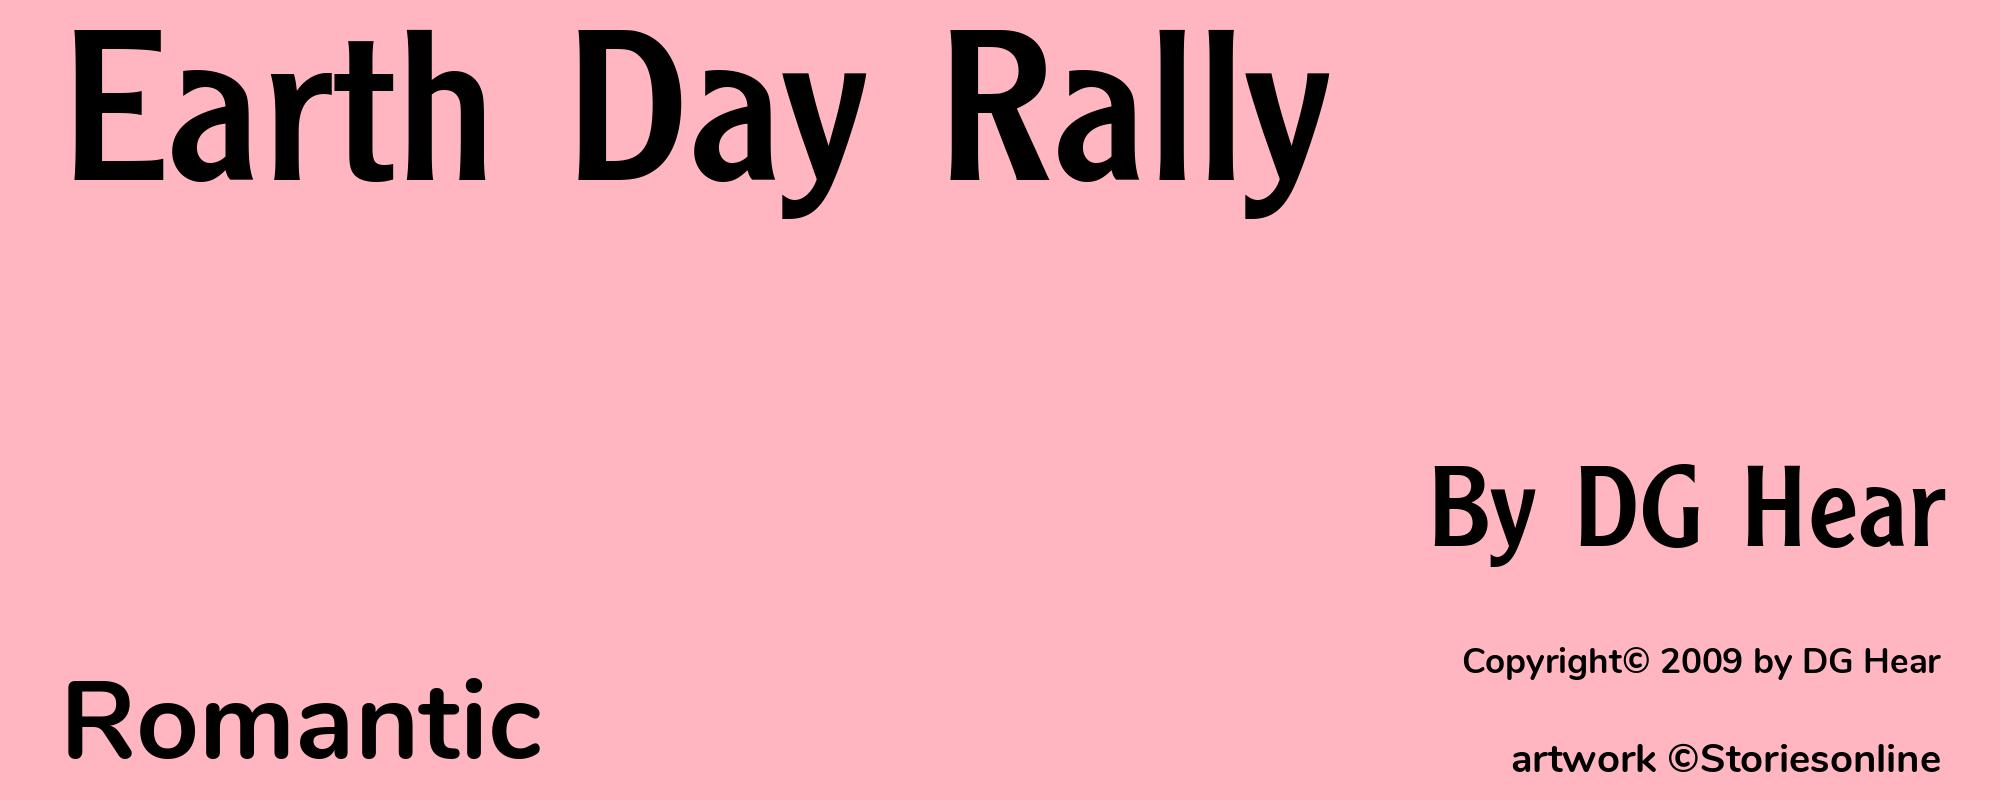 Earth Day Rally - Cover